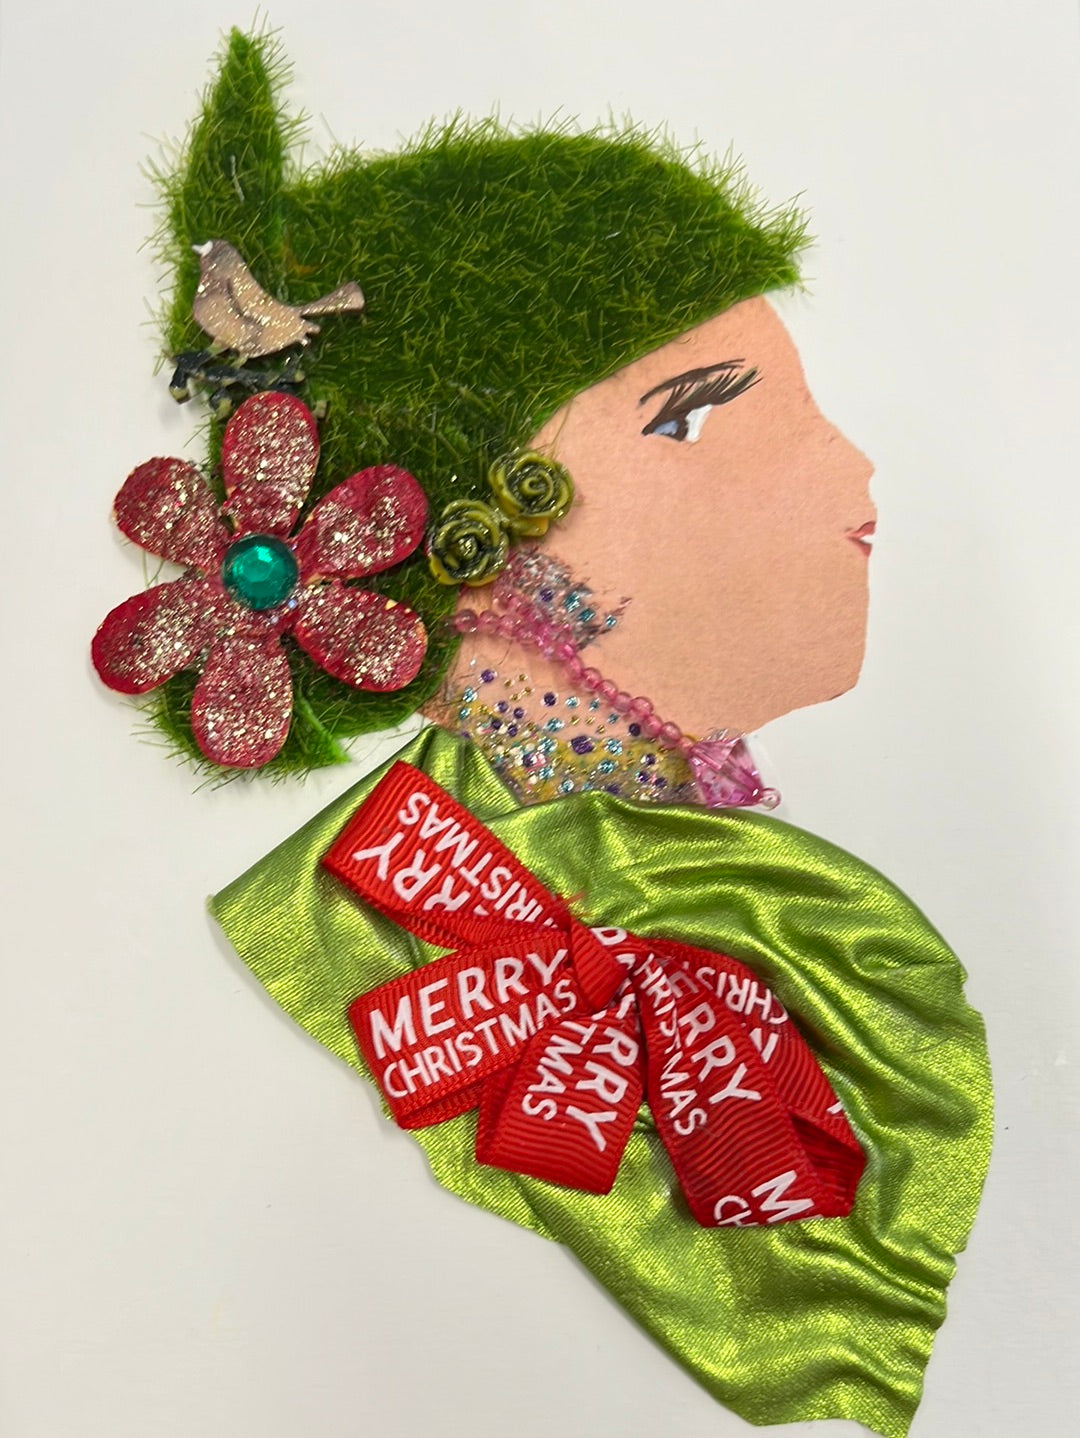 She wears a silk green blouse with a bow that says merry christmas. Her hair is made of a grass fabric. She wears a glittery red flower and a small bird in her hair. 